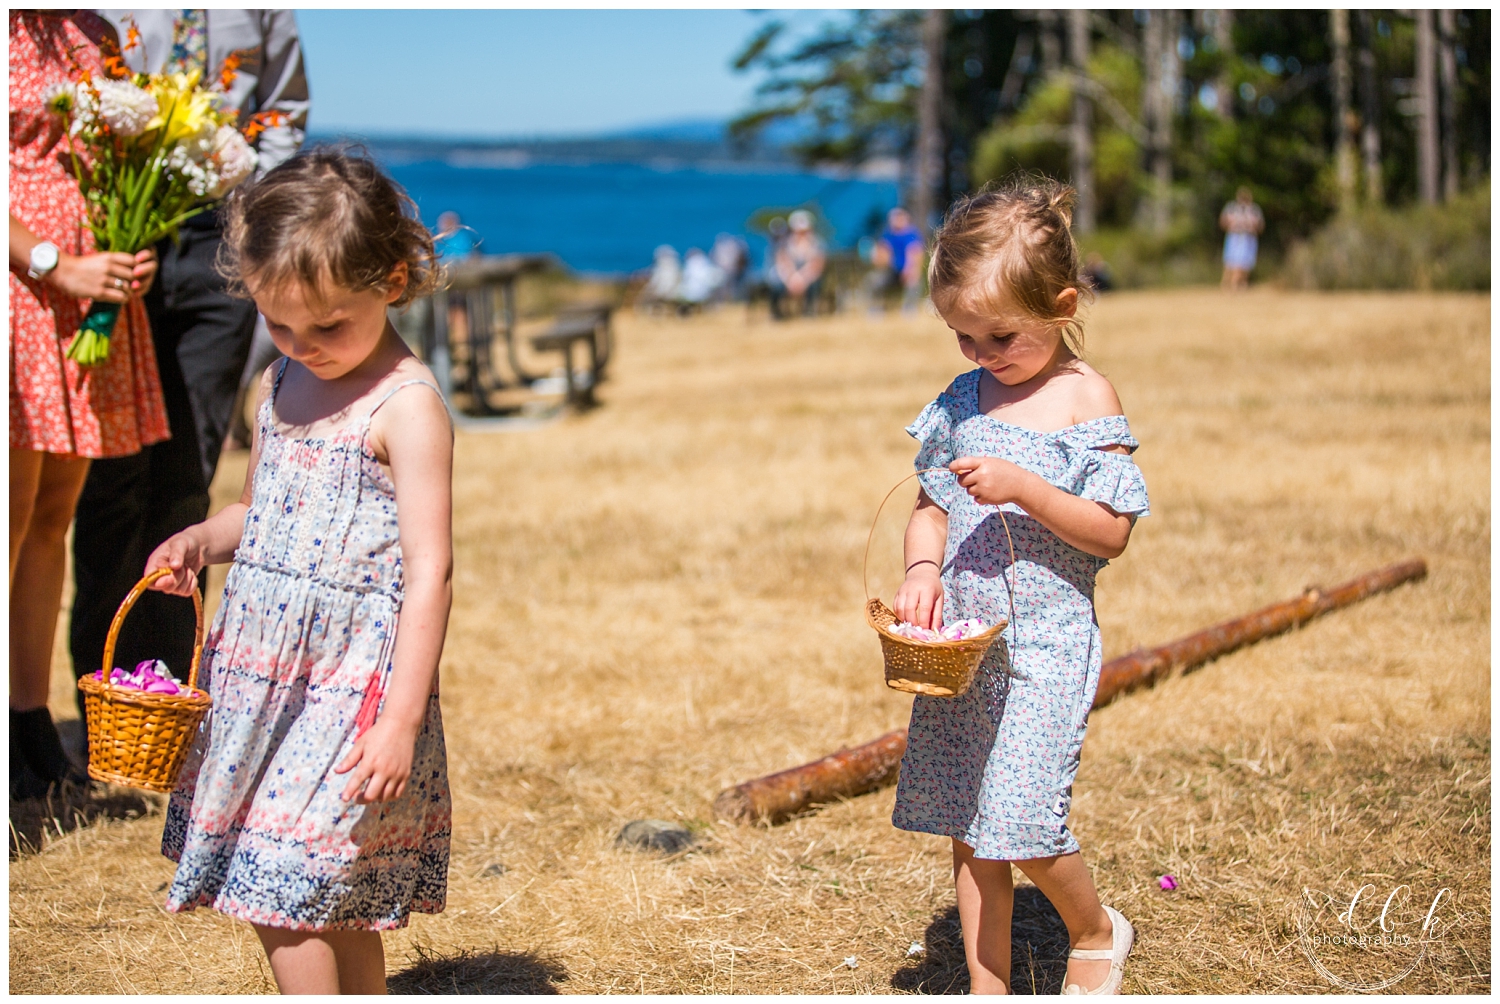 flower girls wearing flowered dresses tossing petals at ceremony in Anacortes, Washington